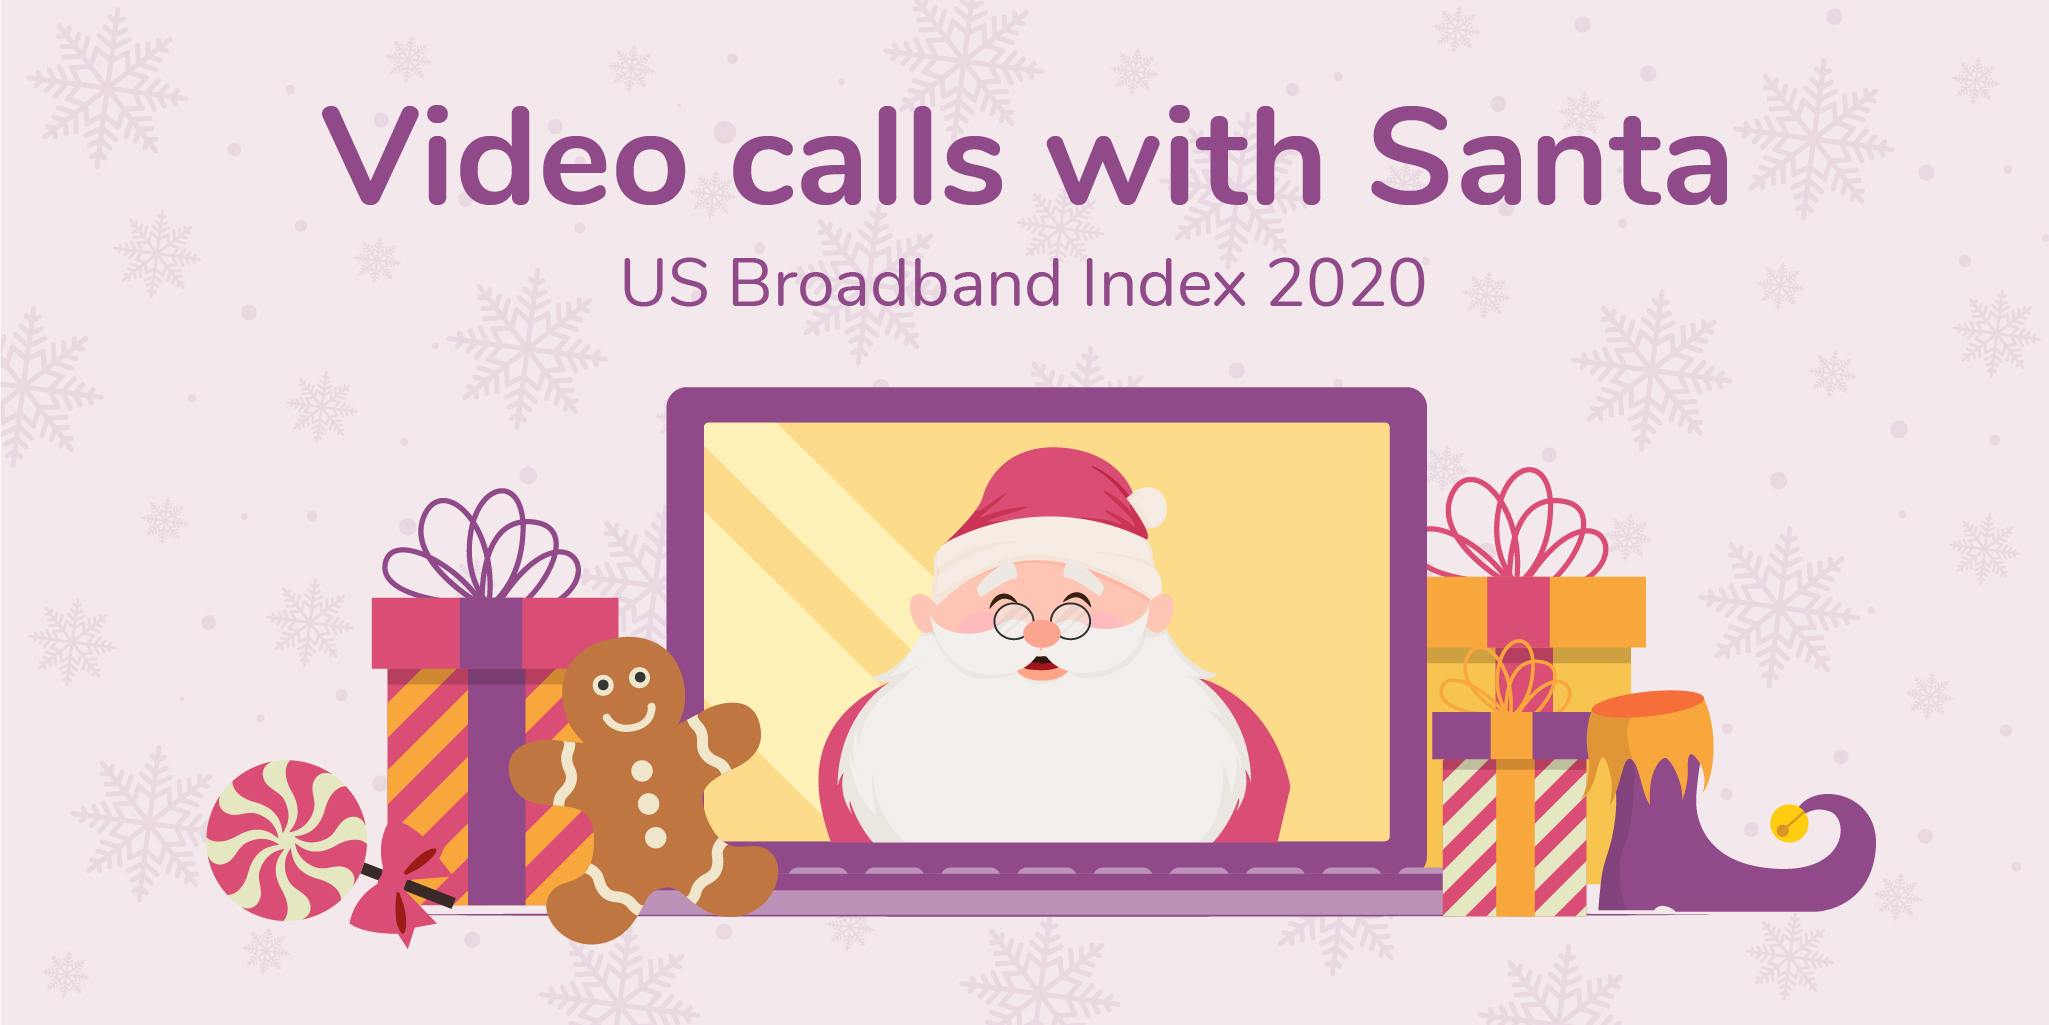 Graphic title image for video calls with Santa